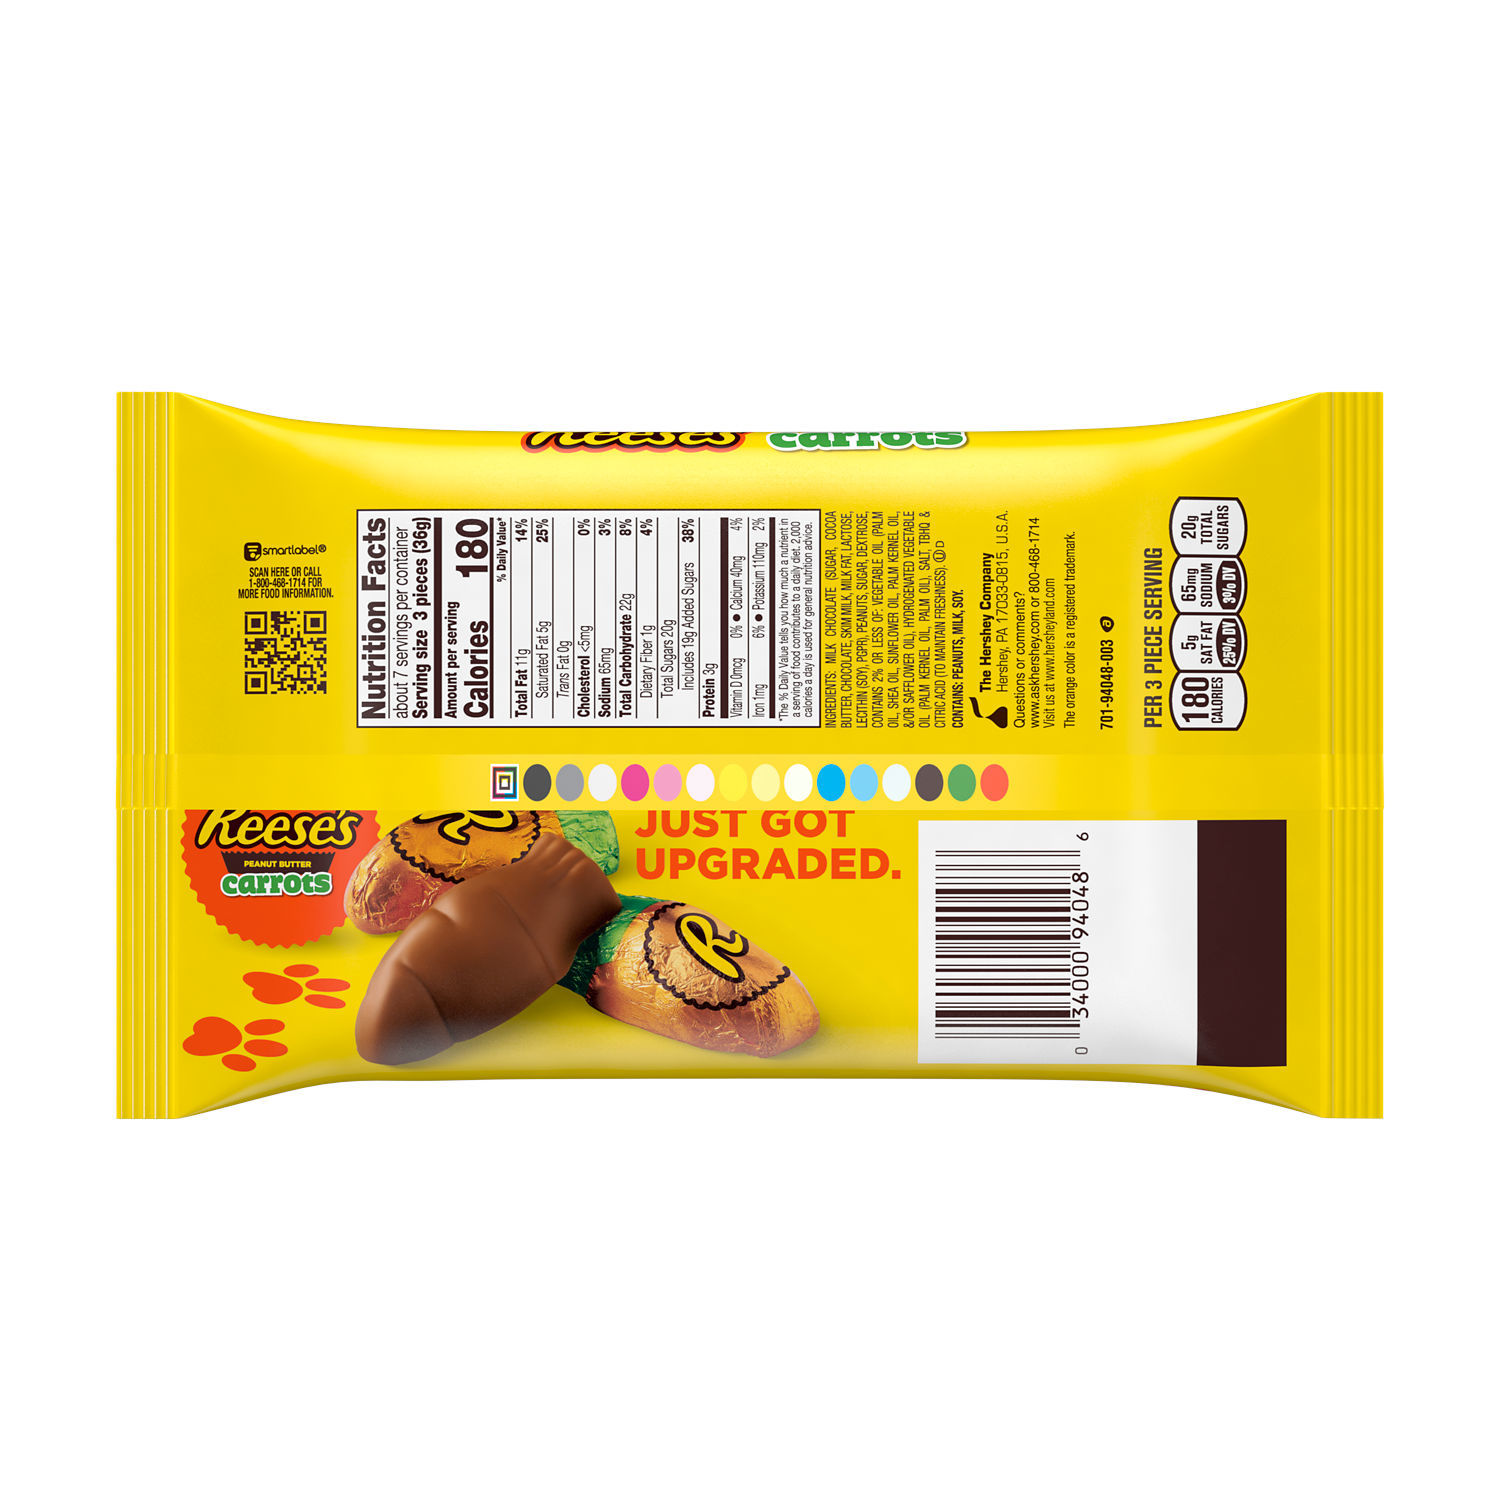 Reese's Milk Chocolate Peanut Butter Creme Carrots Easter Candy, Bag 9 oz - image 2 of 8